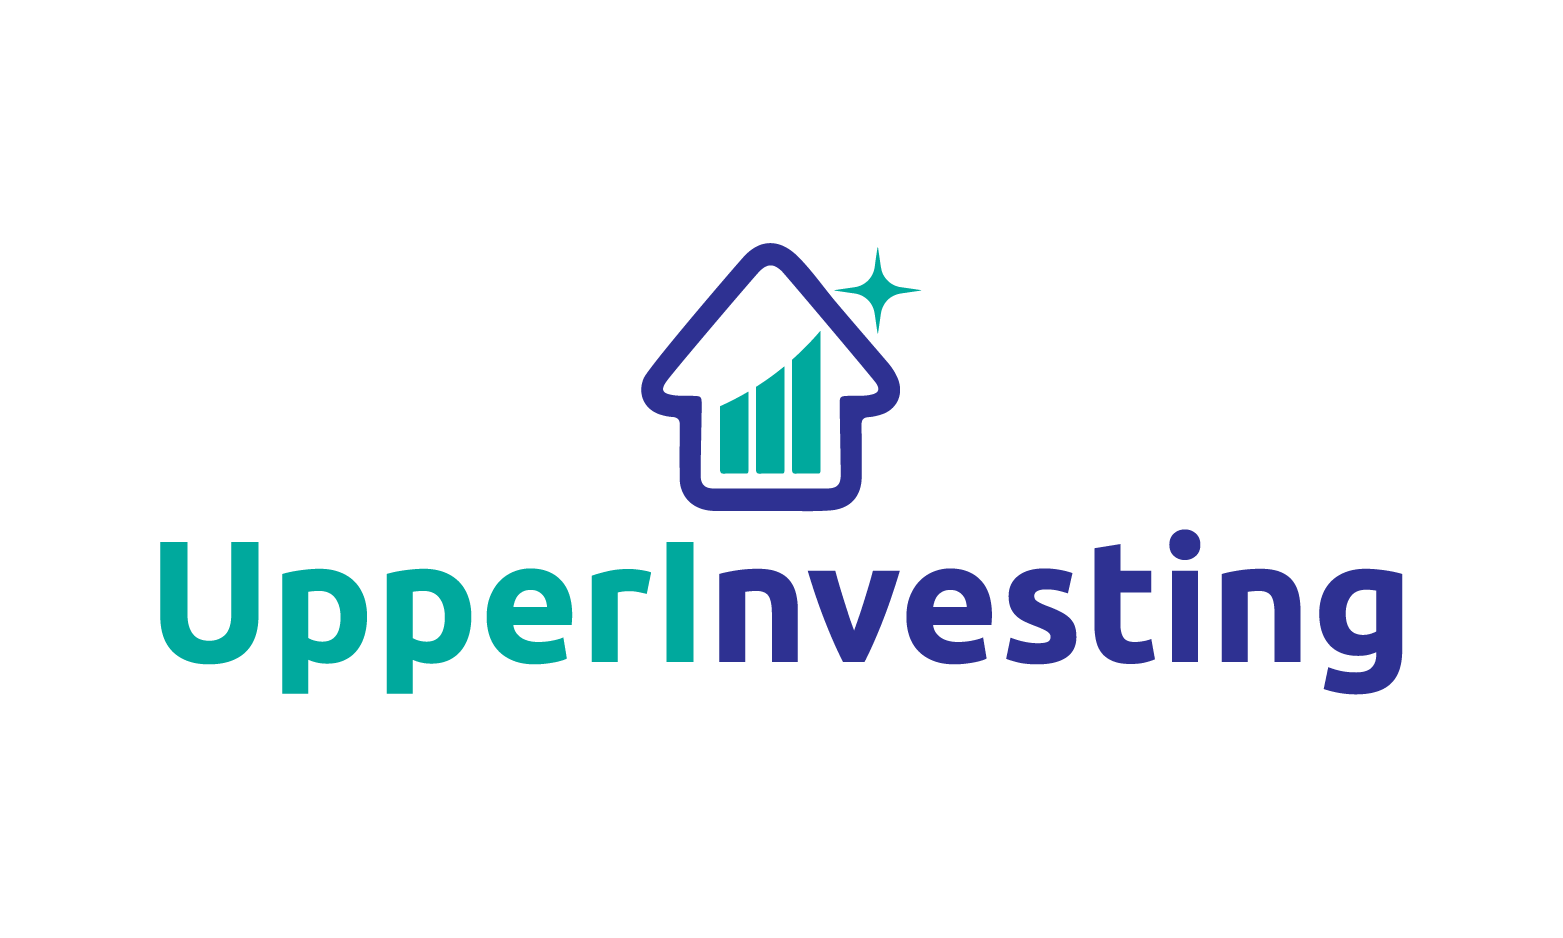 UpperInvesting.com - Creative brandable domain for sale